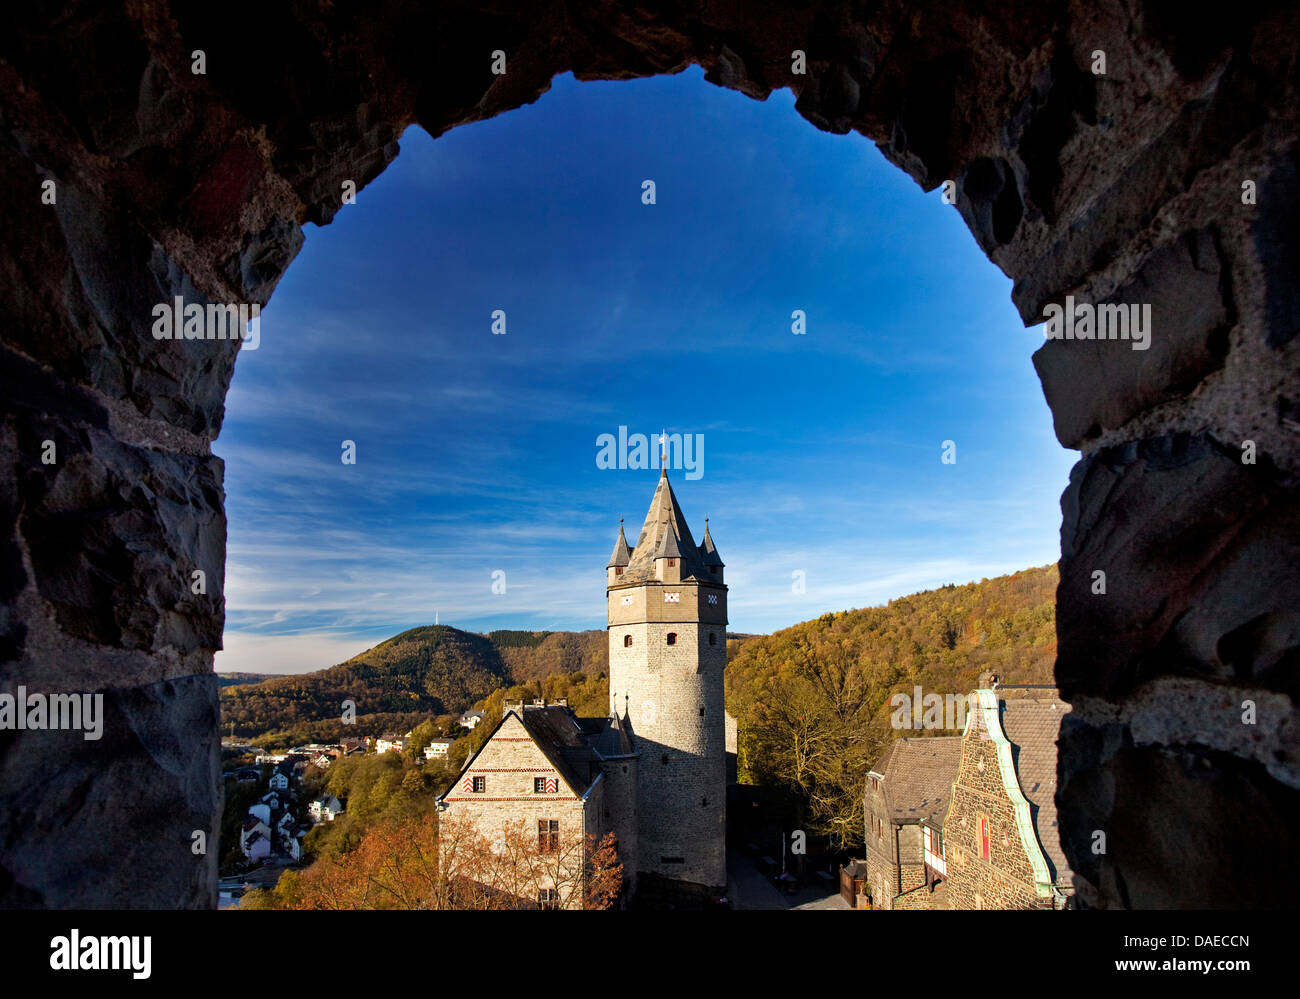 view through a window with a round arch at Altena Castle on the Klusenberg, Germany, North Rhine-Westphalia, Sauerland, Altena Stock Photo